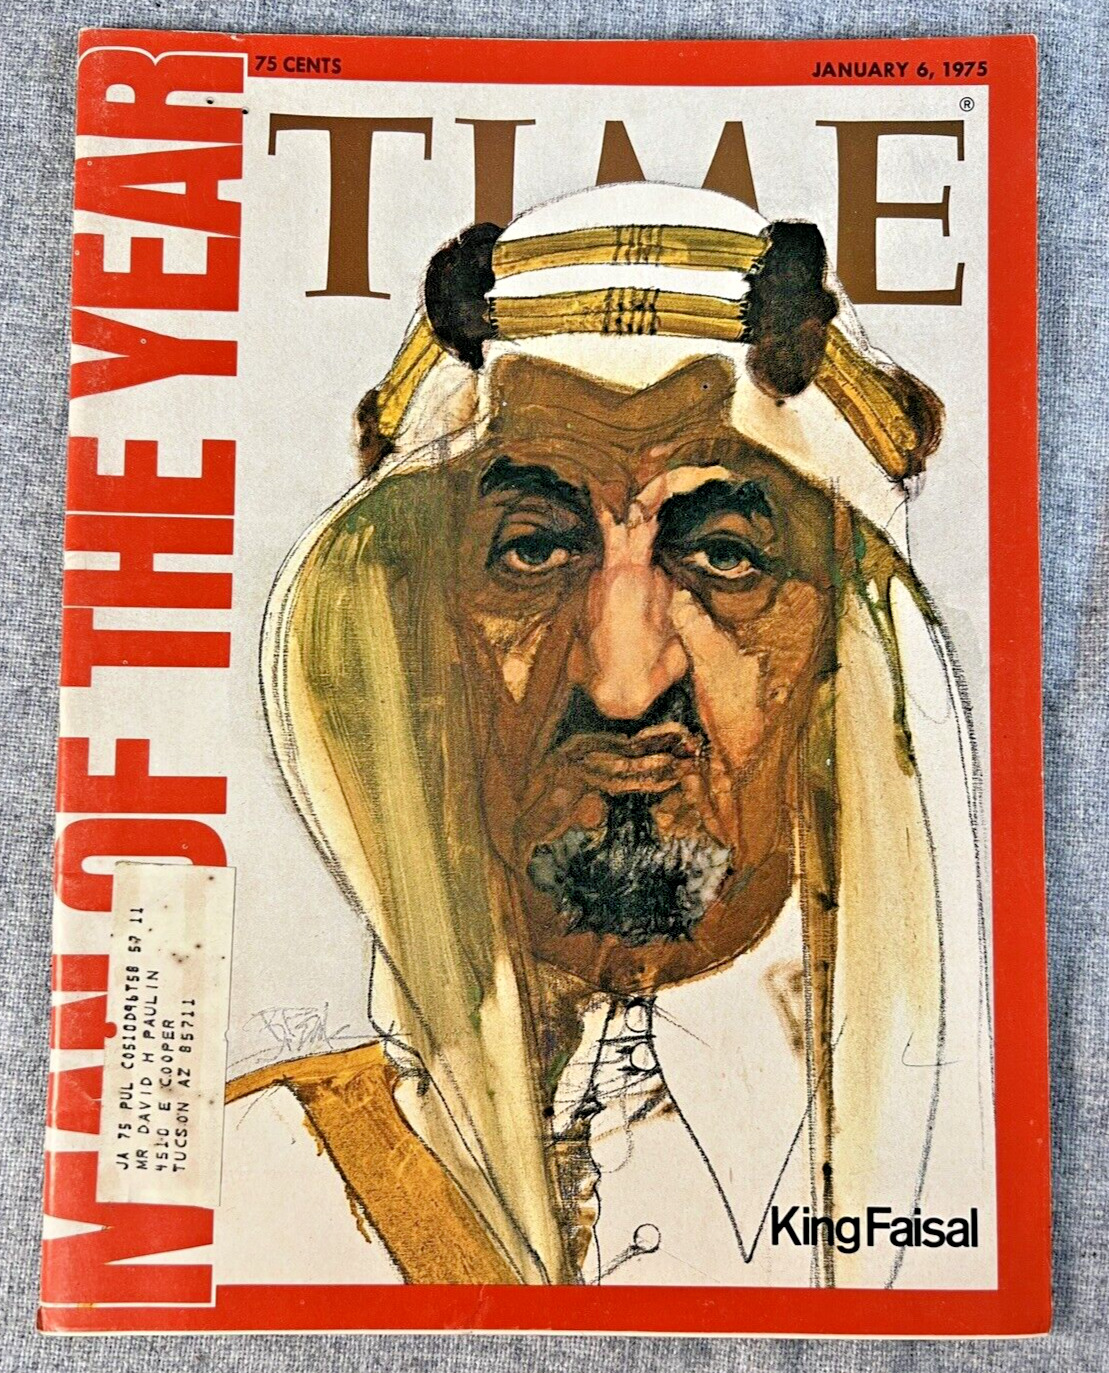 Time Magazine January 6, 1975 - KING FAISAL Man of the Year